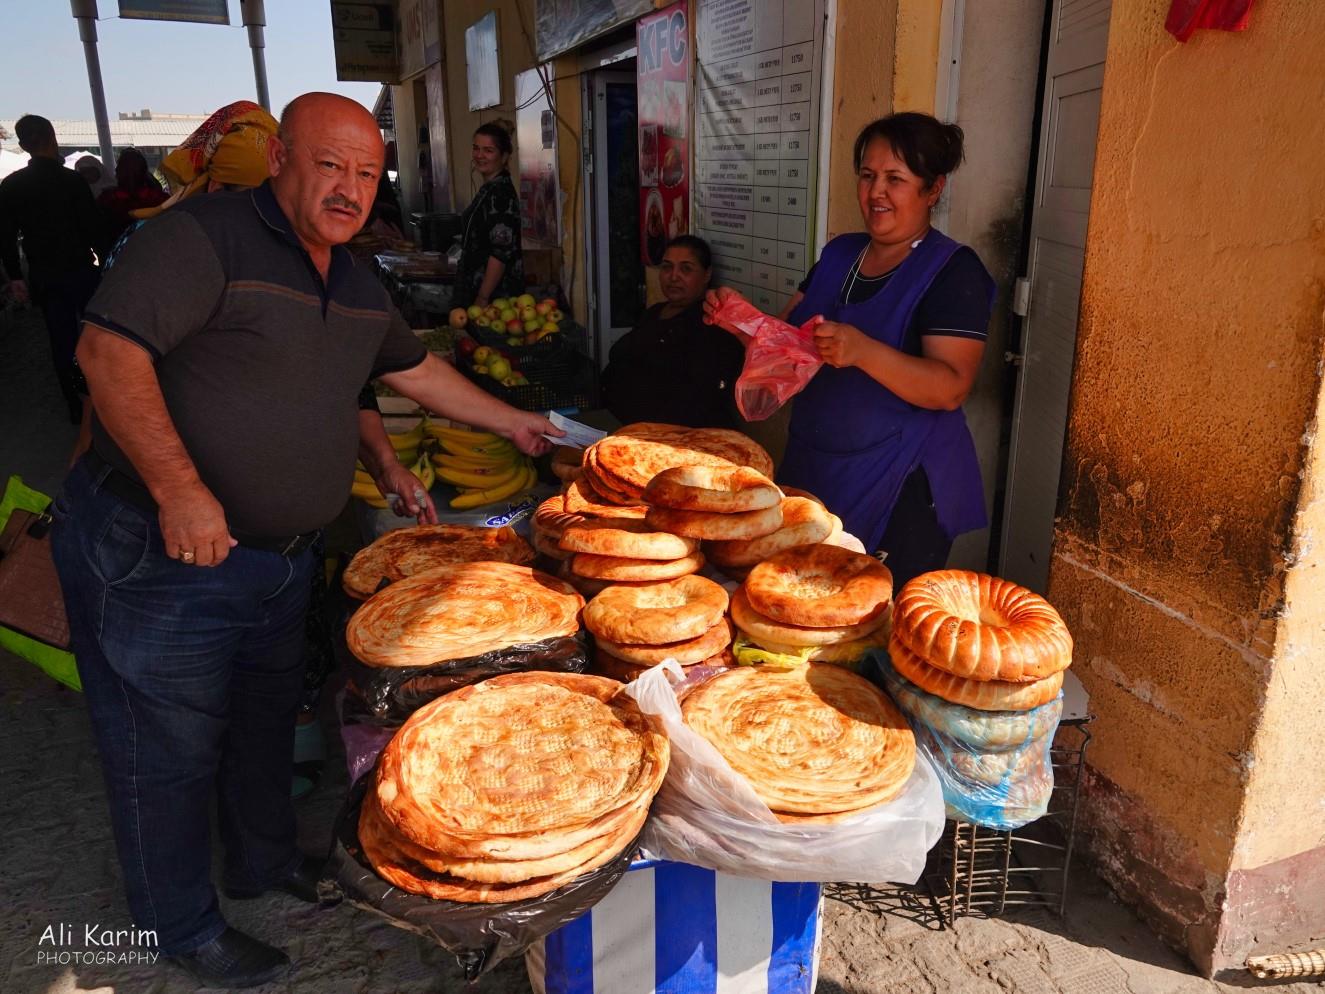 Bukhara, Oct 2019, Bread was ubiquitous as were eateries